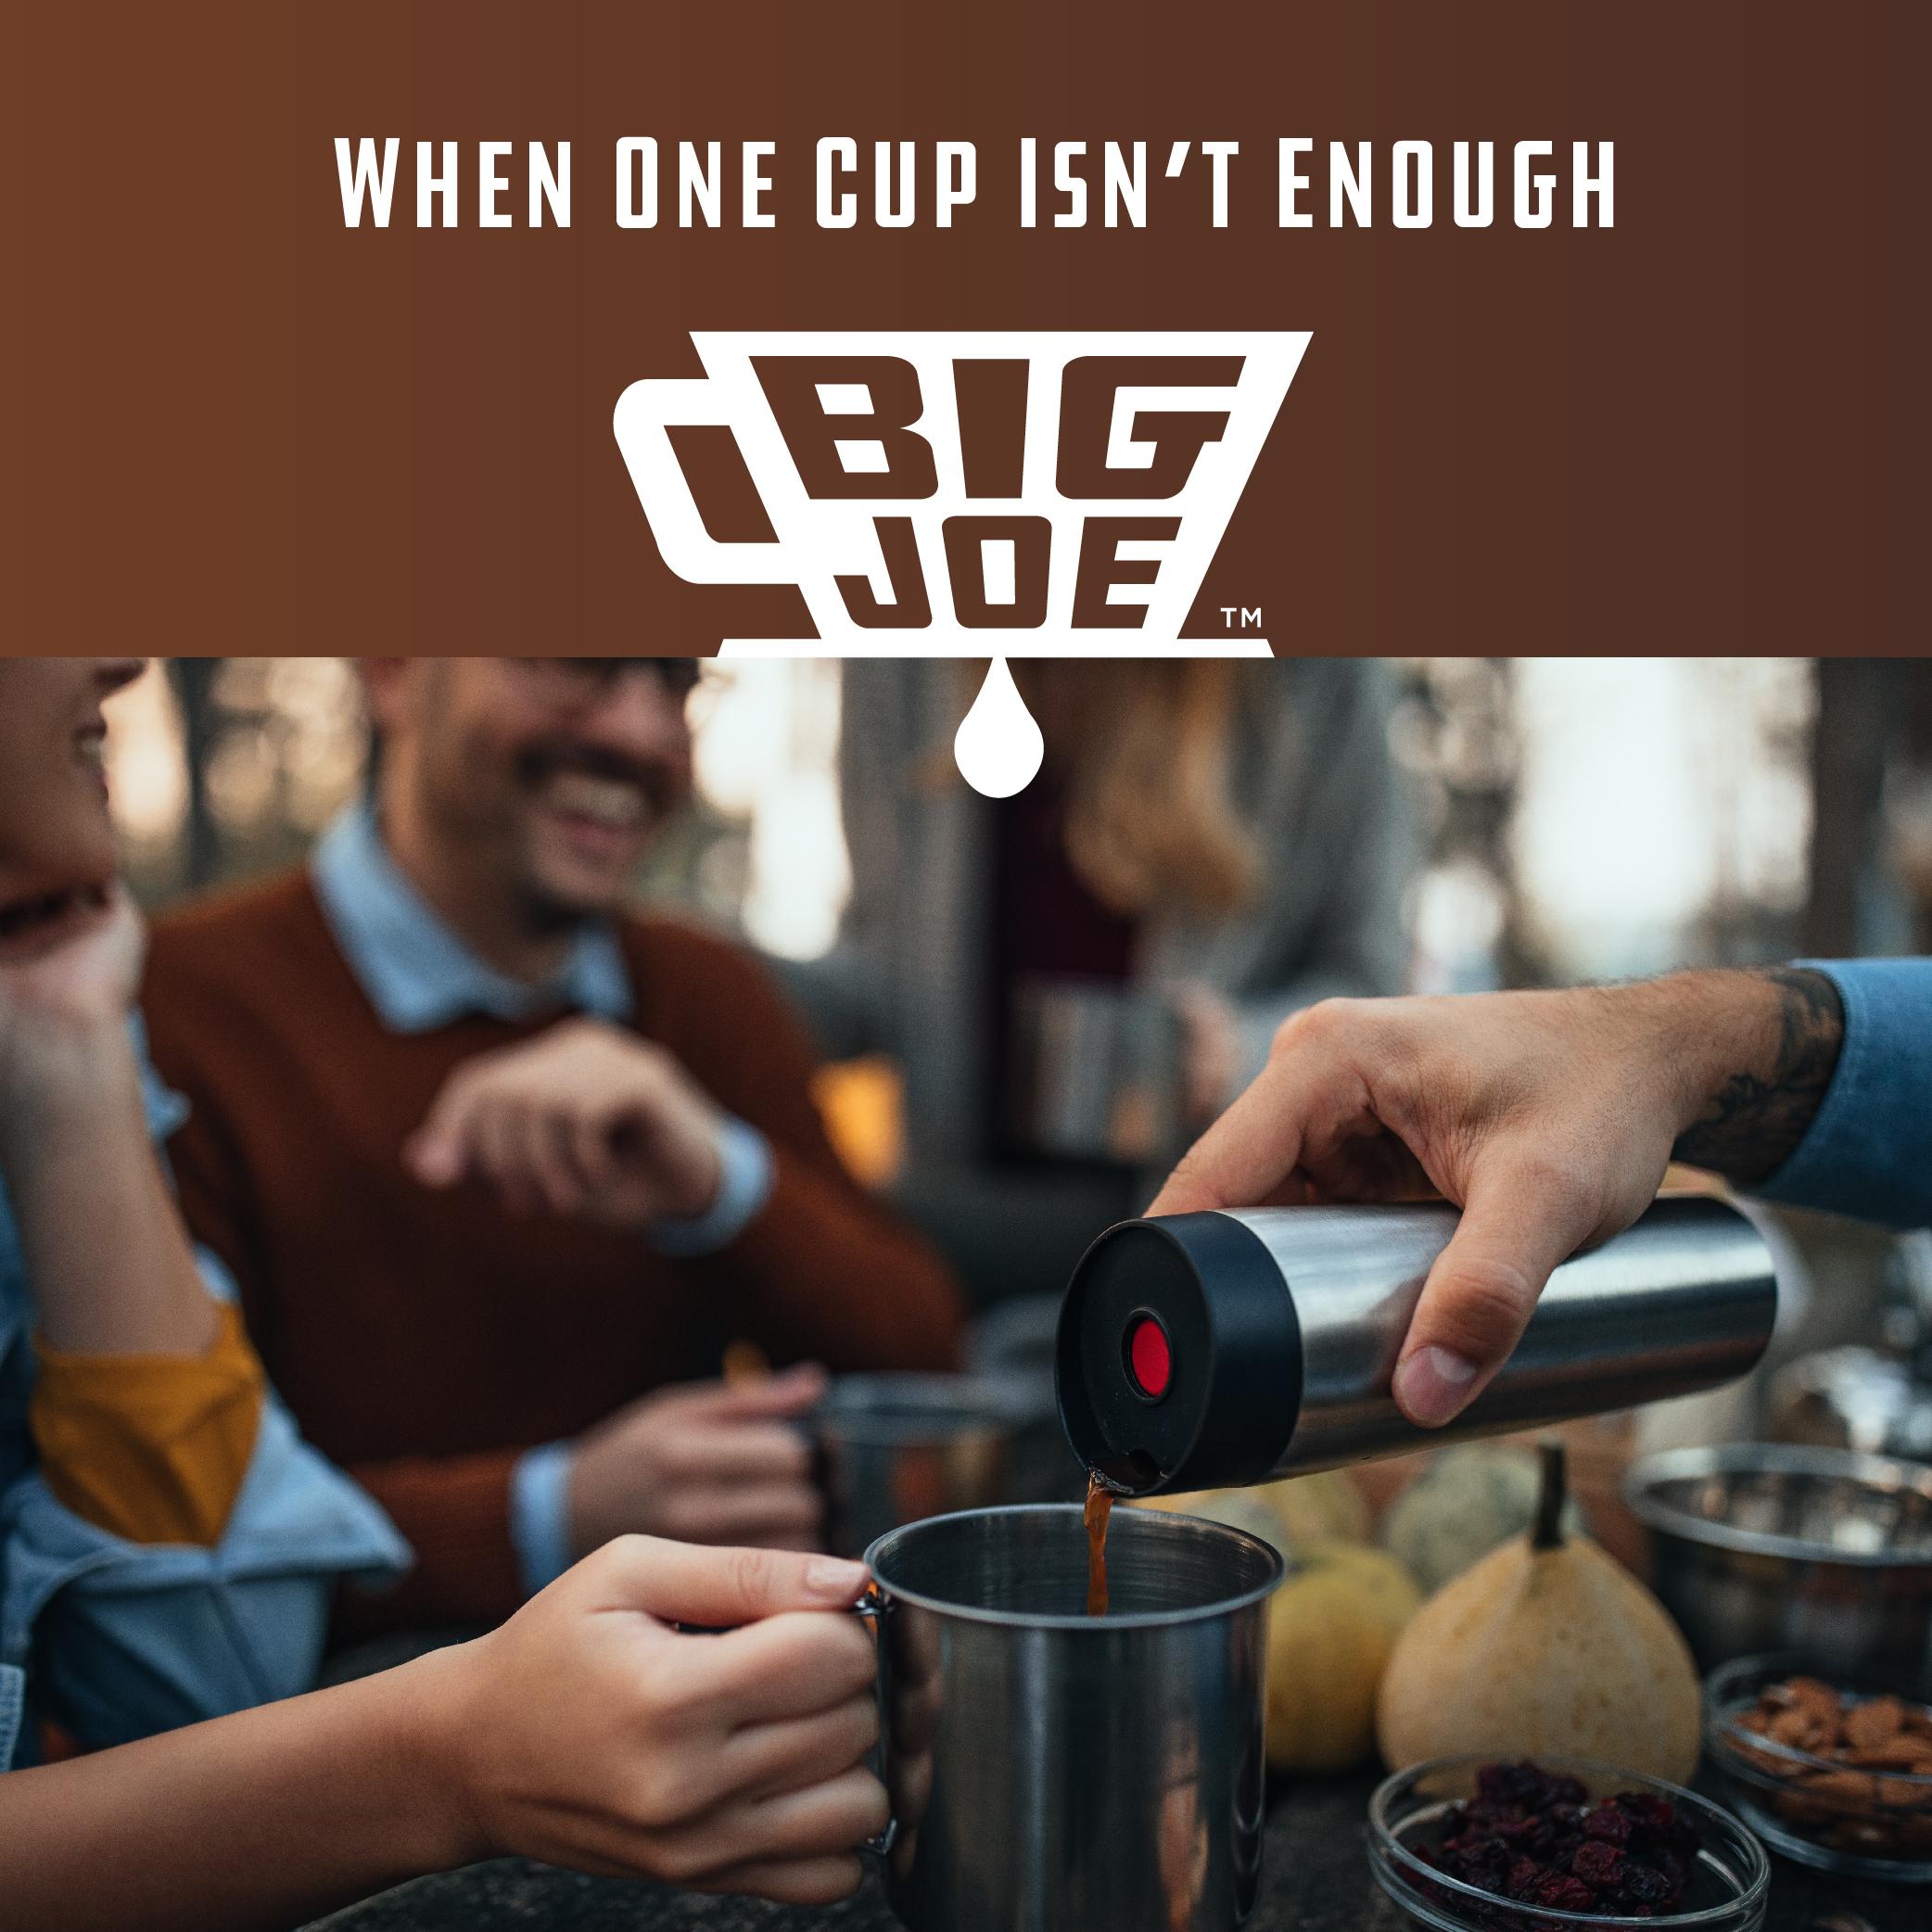 Big Joe Large Pour Over Coffee Maker with 50 Large Filters